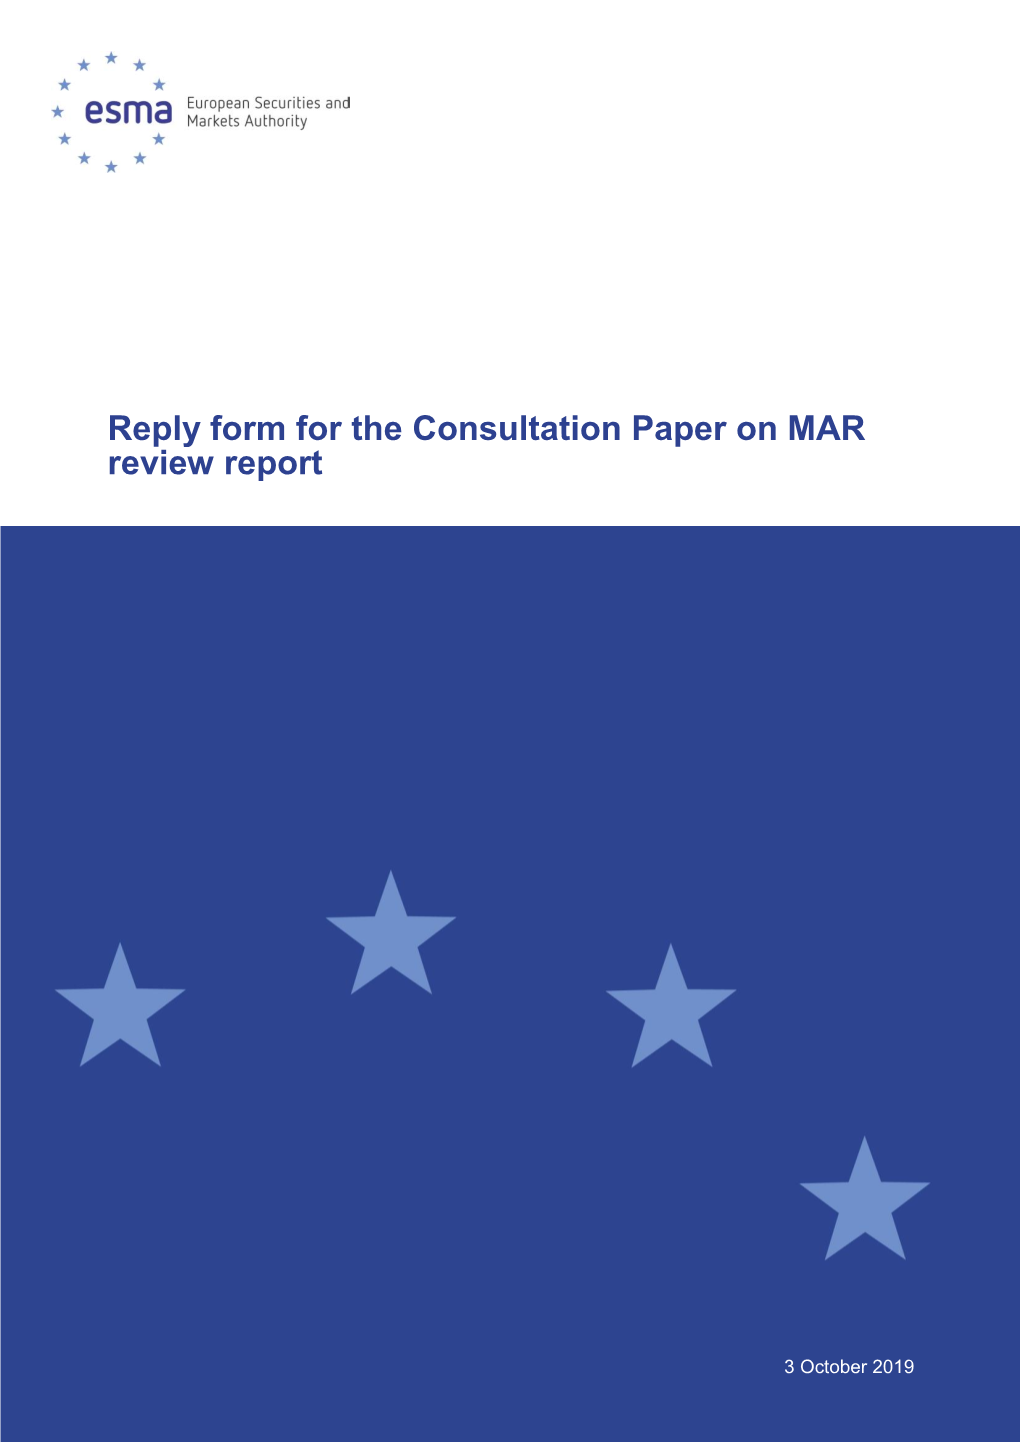 Reply Form for the Mifid II/Mifir Consultation Paper